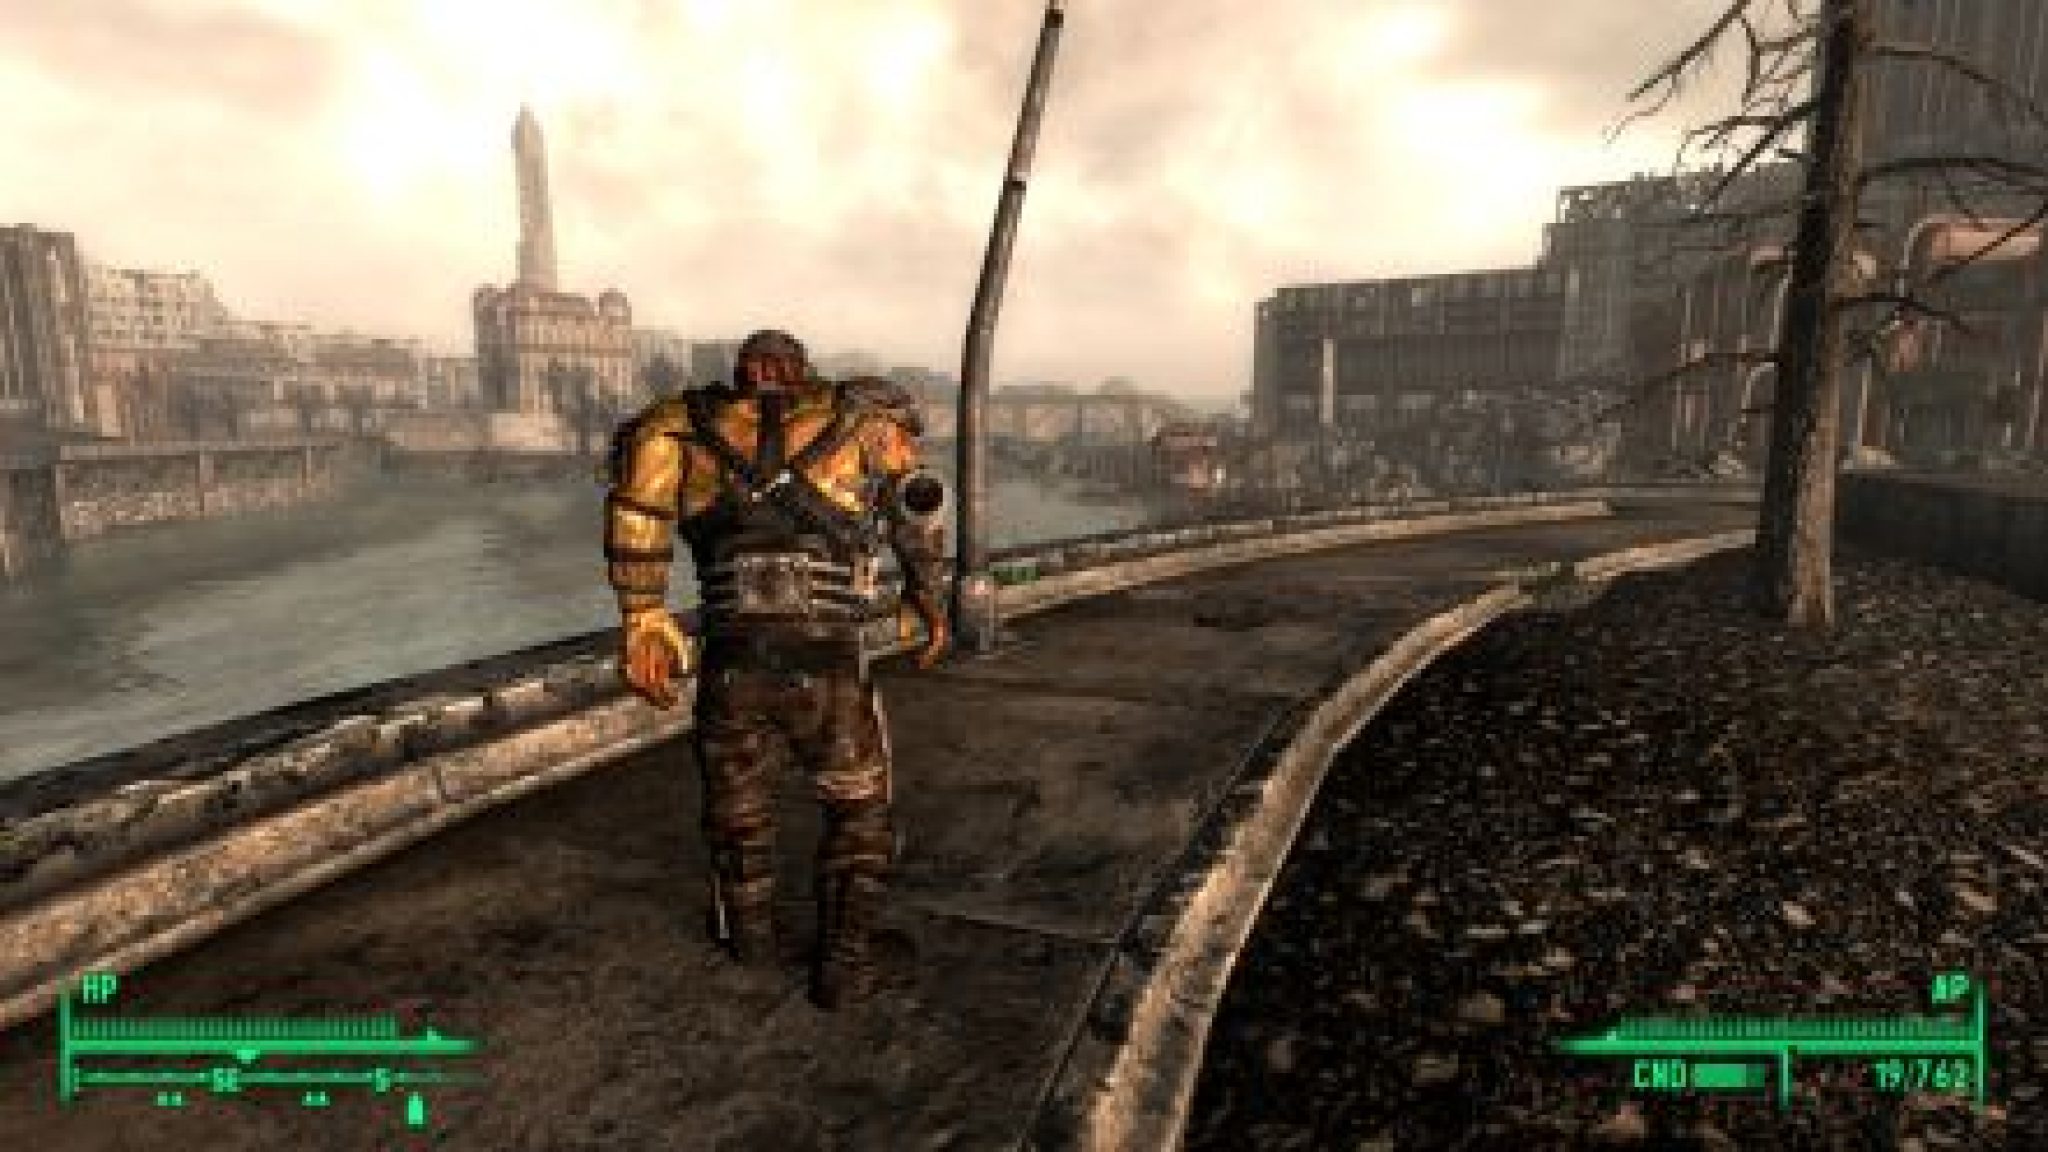 for ios instal Fallout: A Post Nuclear Role Playing Game